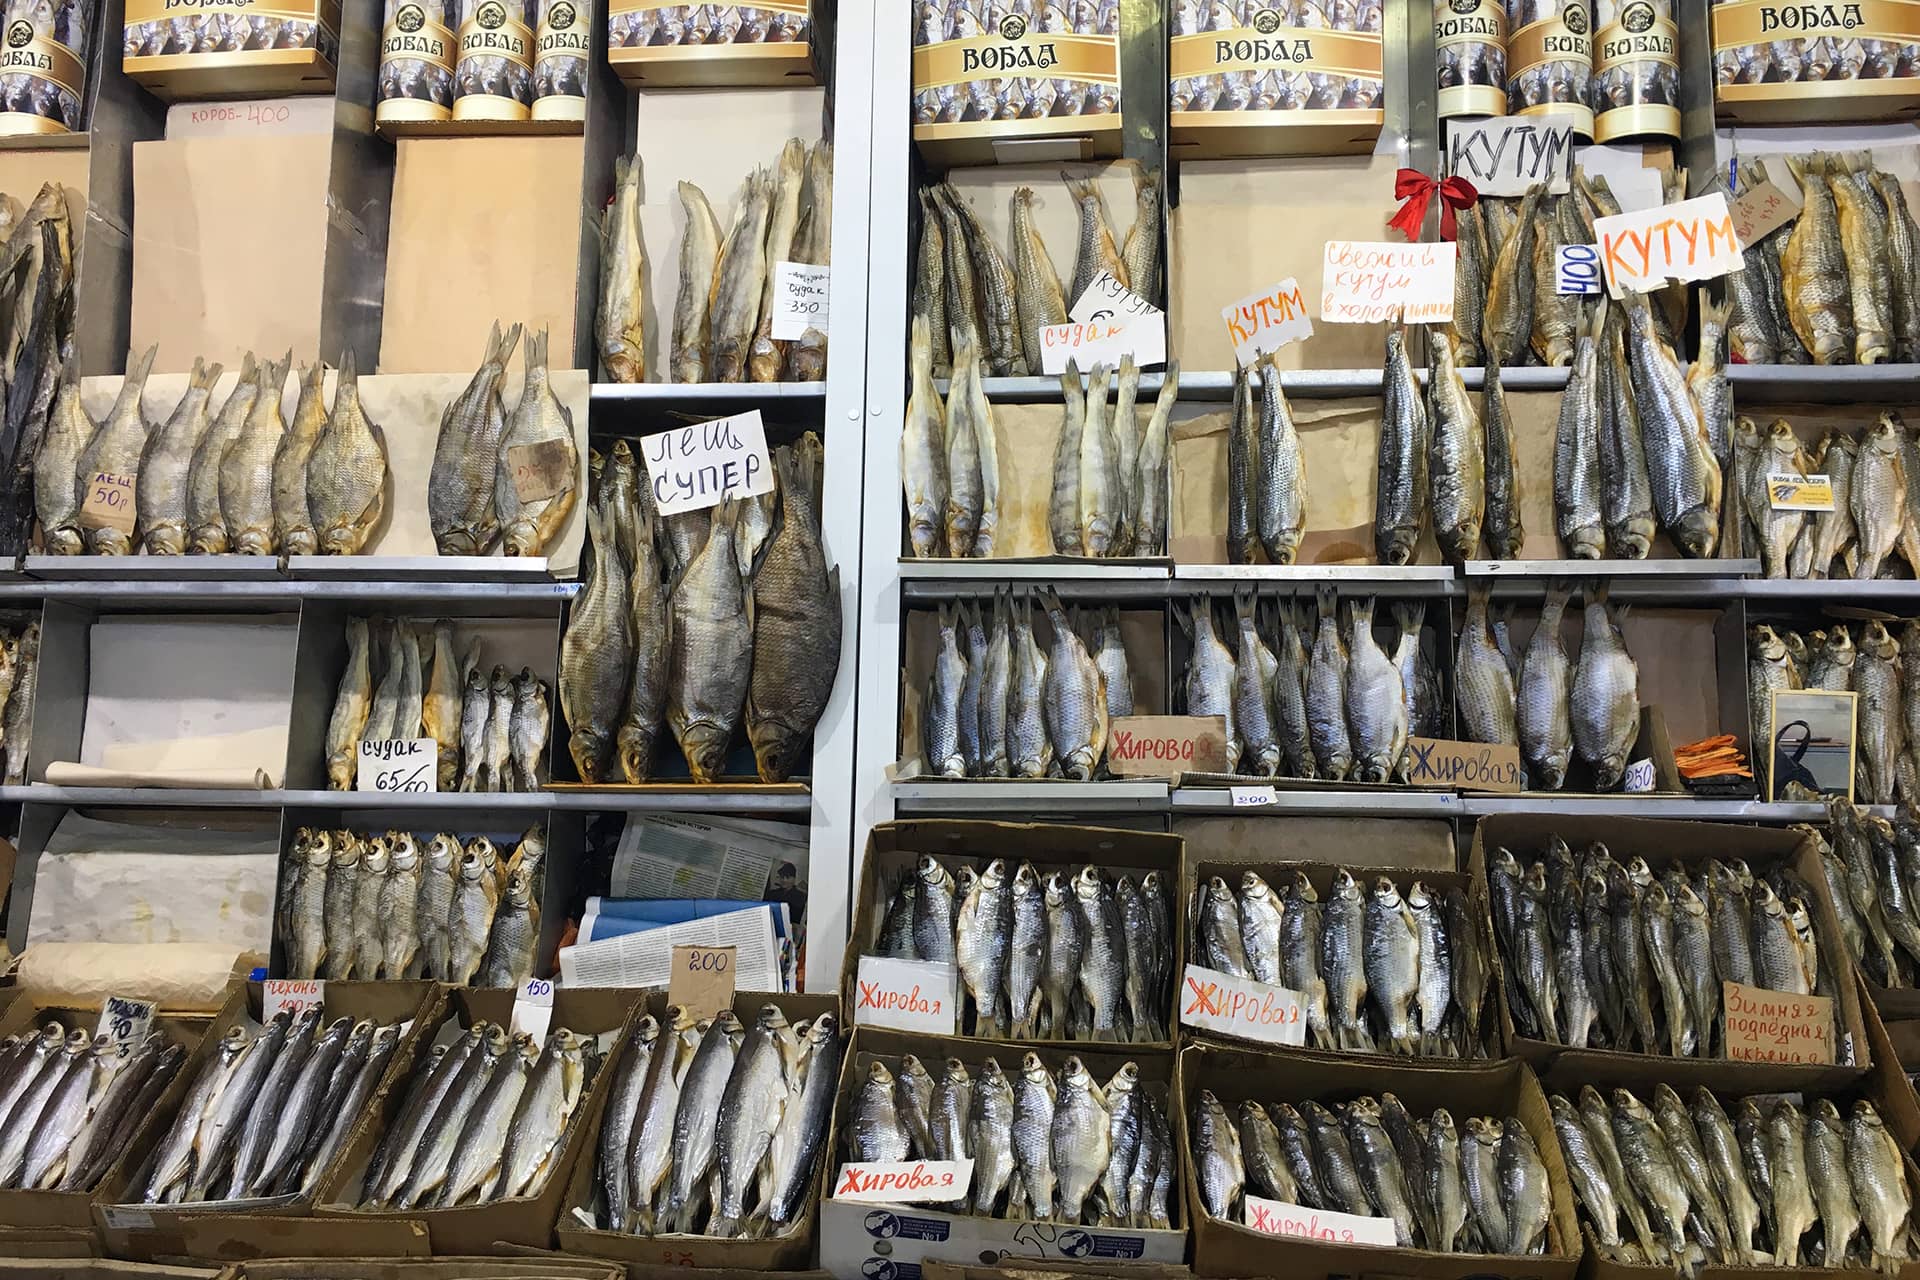 A place on a market where different kinds of dried fish are sold, names of fish in Russian language